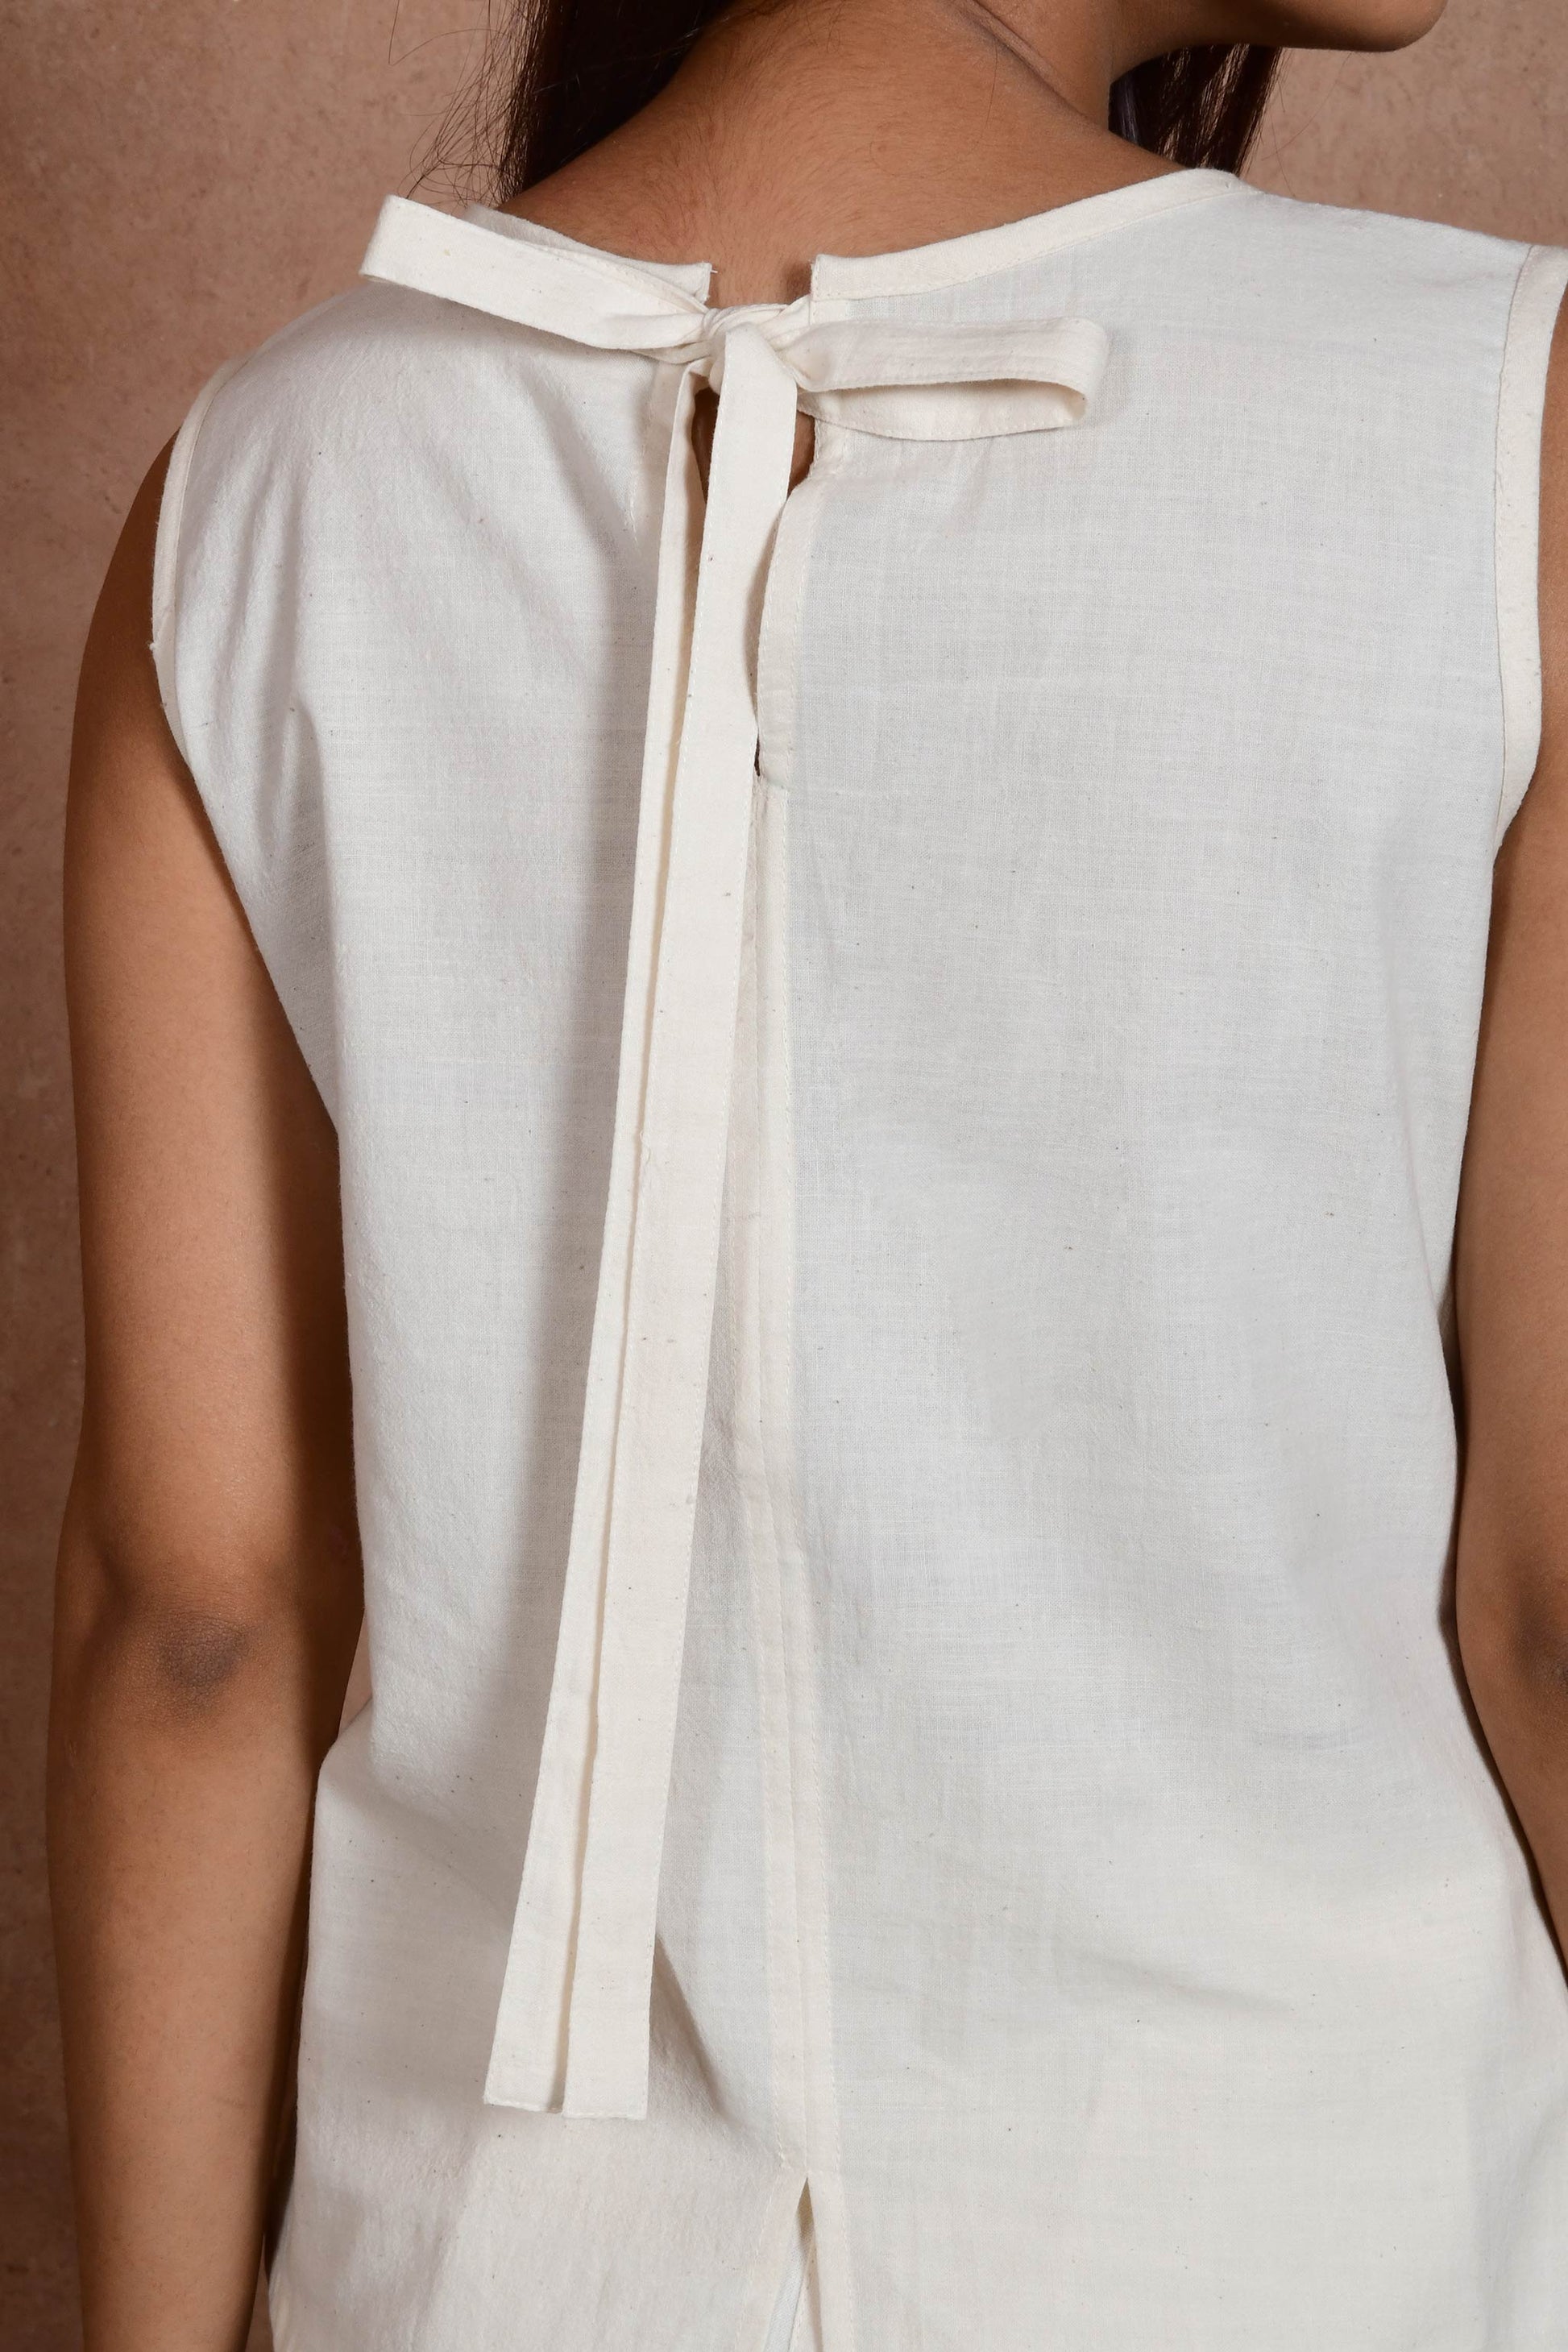 A close up of young Indian model posing wearing off white sleeveless top with a bow tied at the neck.